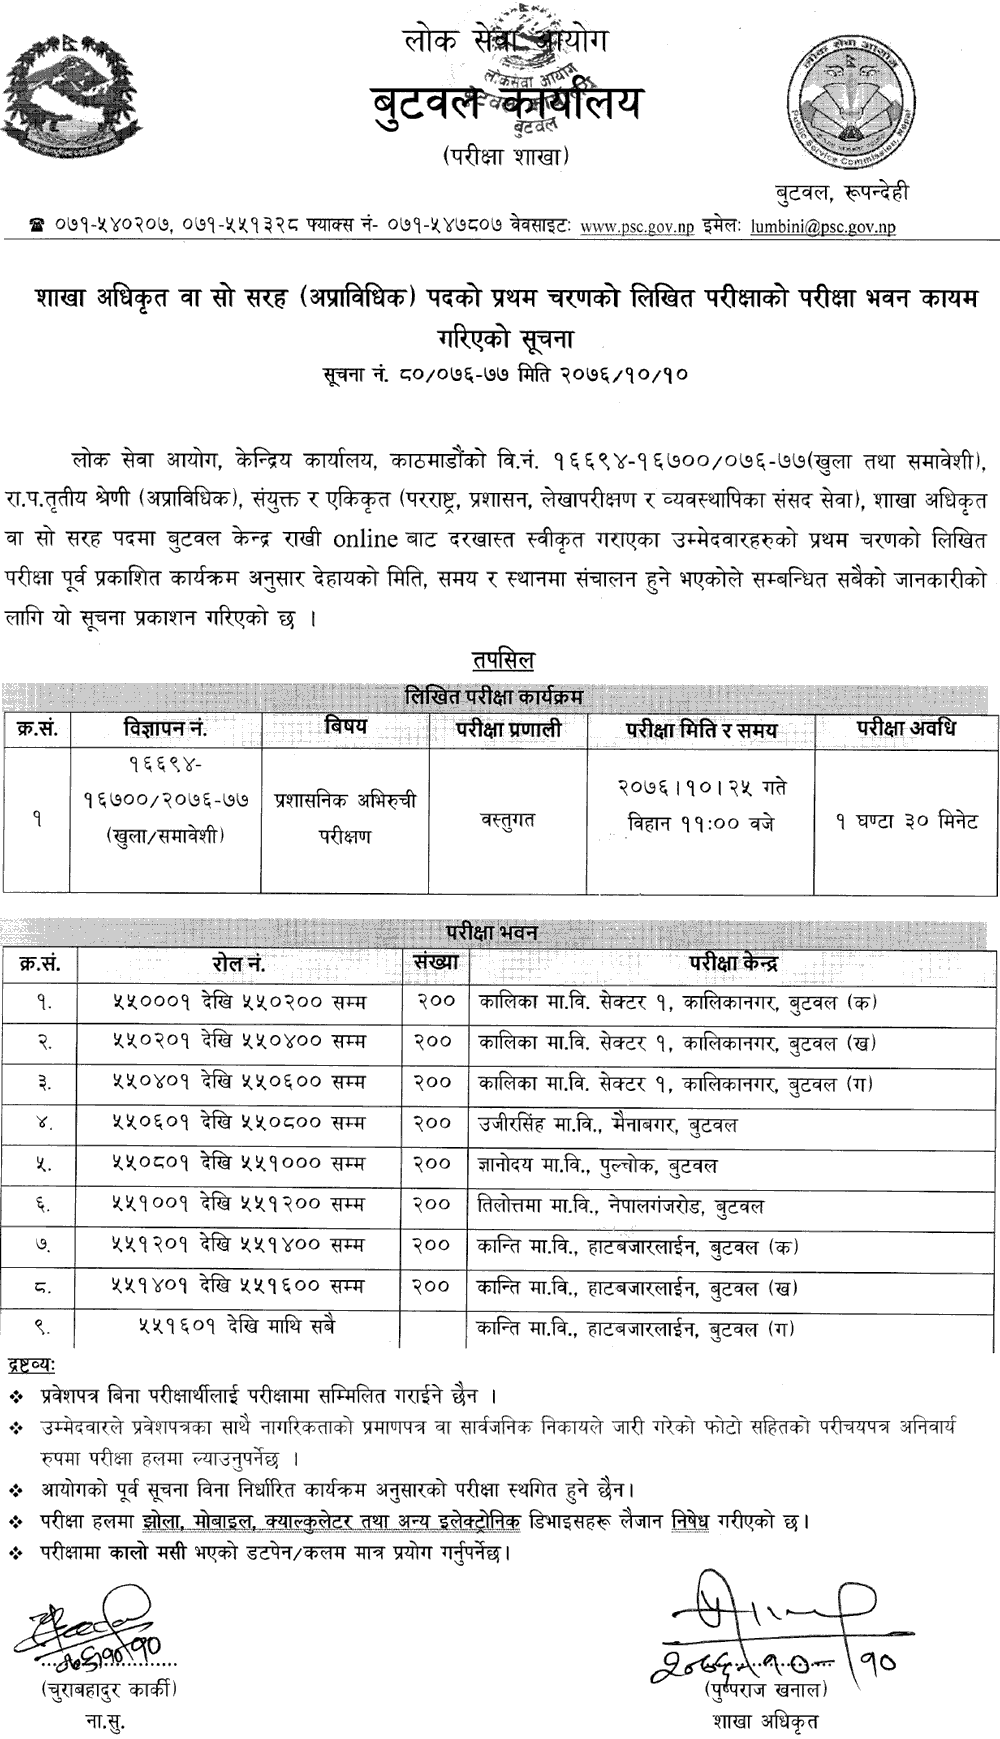 Lok Sewa Aayog Butwal Section Officer First Phase Written Exam Center